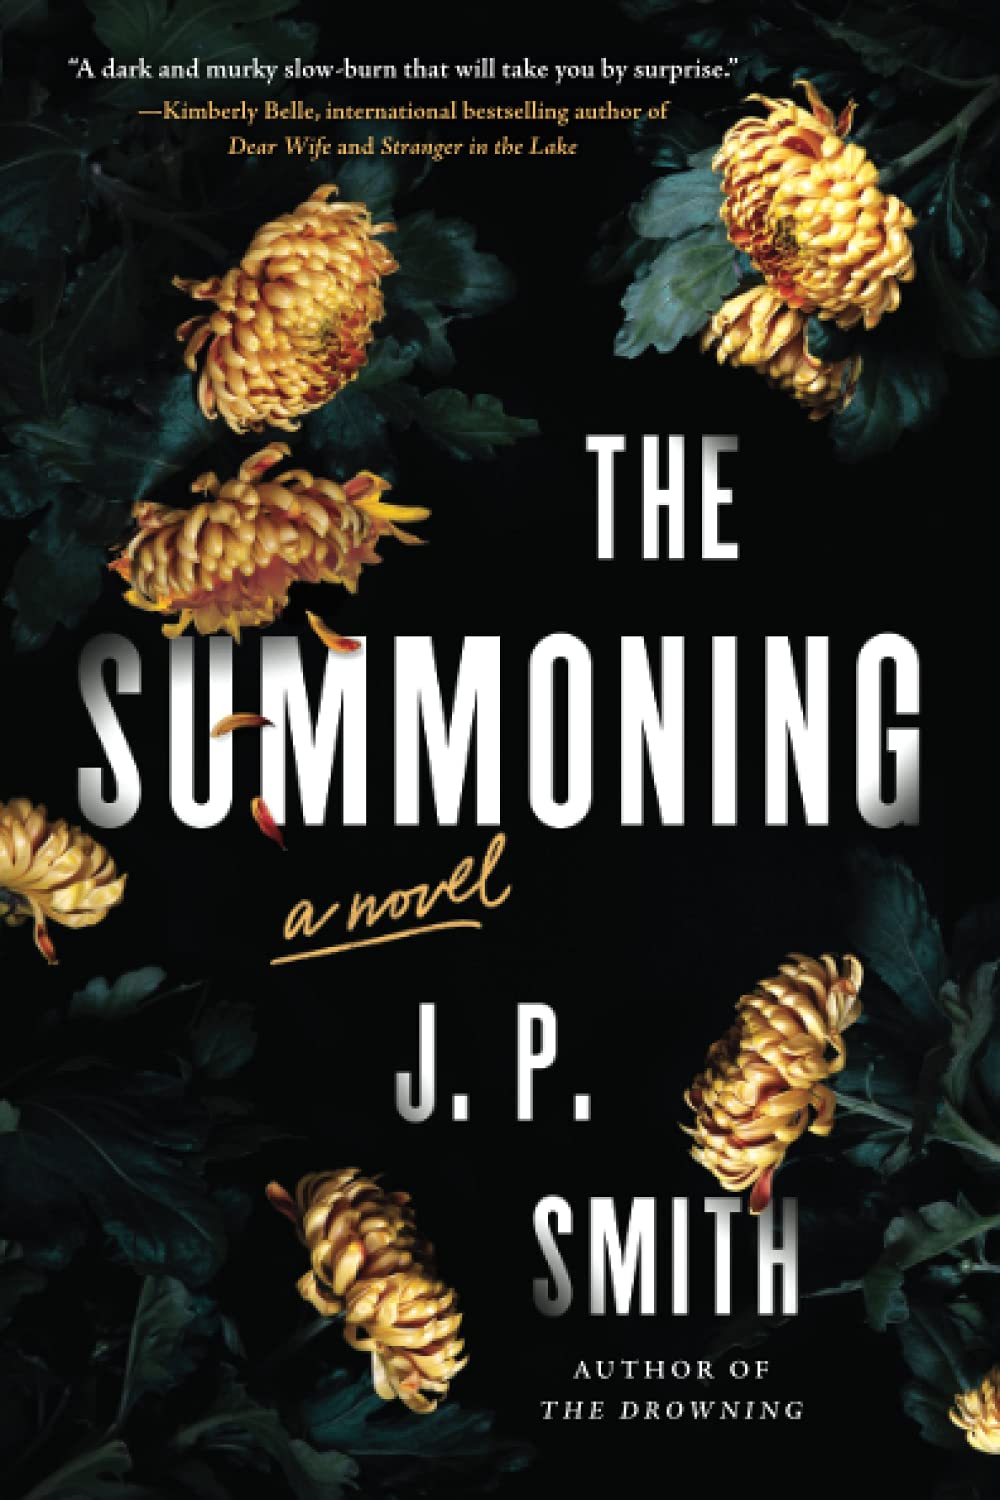 Book cover for "The Summoning" by J.P. Smith